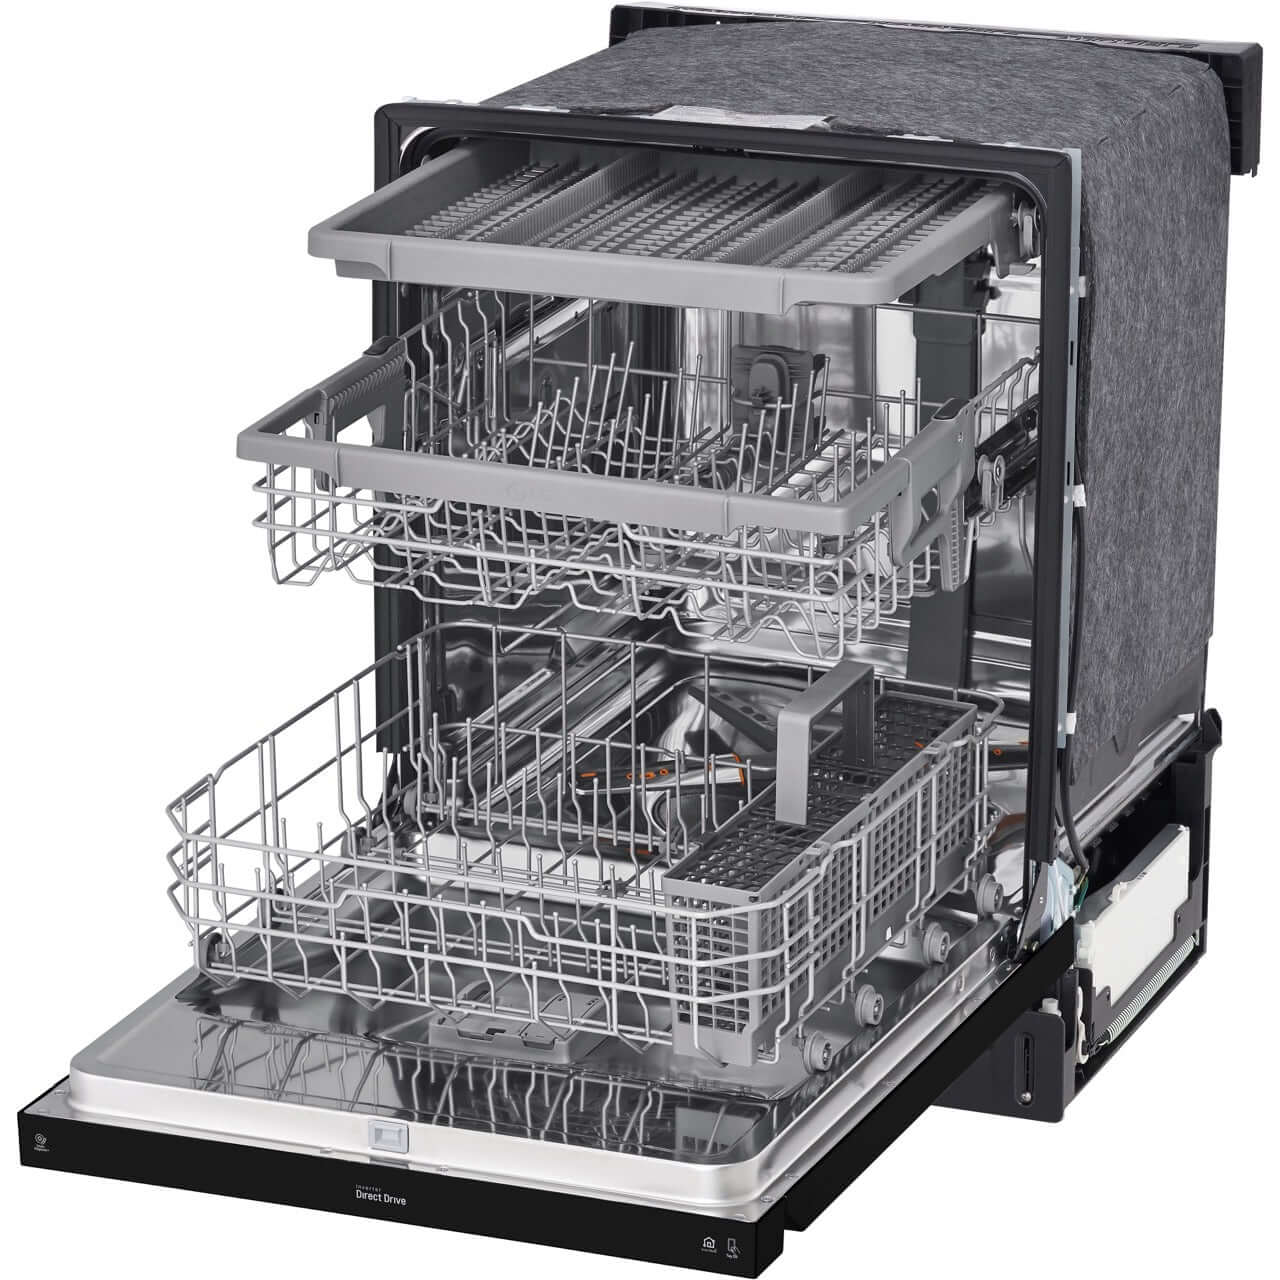 LG 24-Inch Front Control Dishwasher with QuadWash and 3rd Rack in Smooth Black (LDFN4542B)